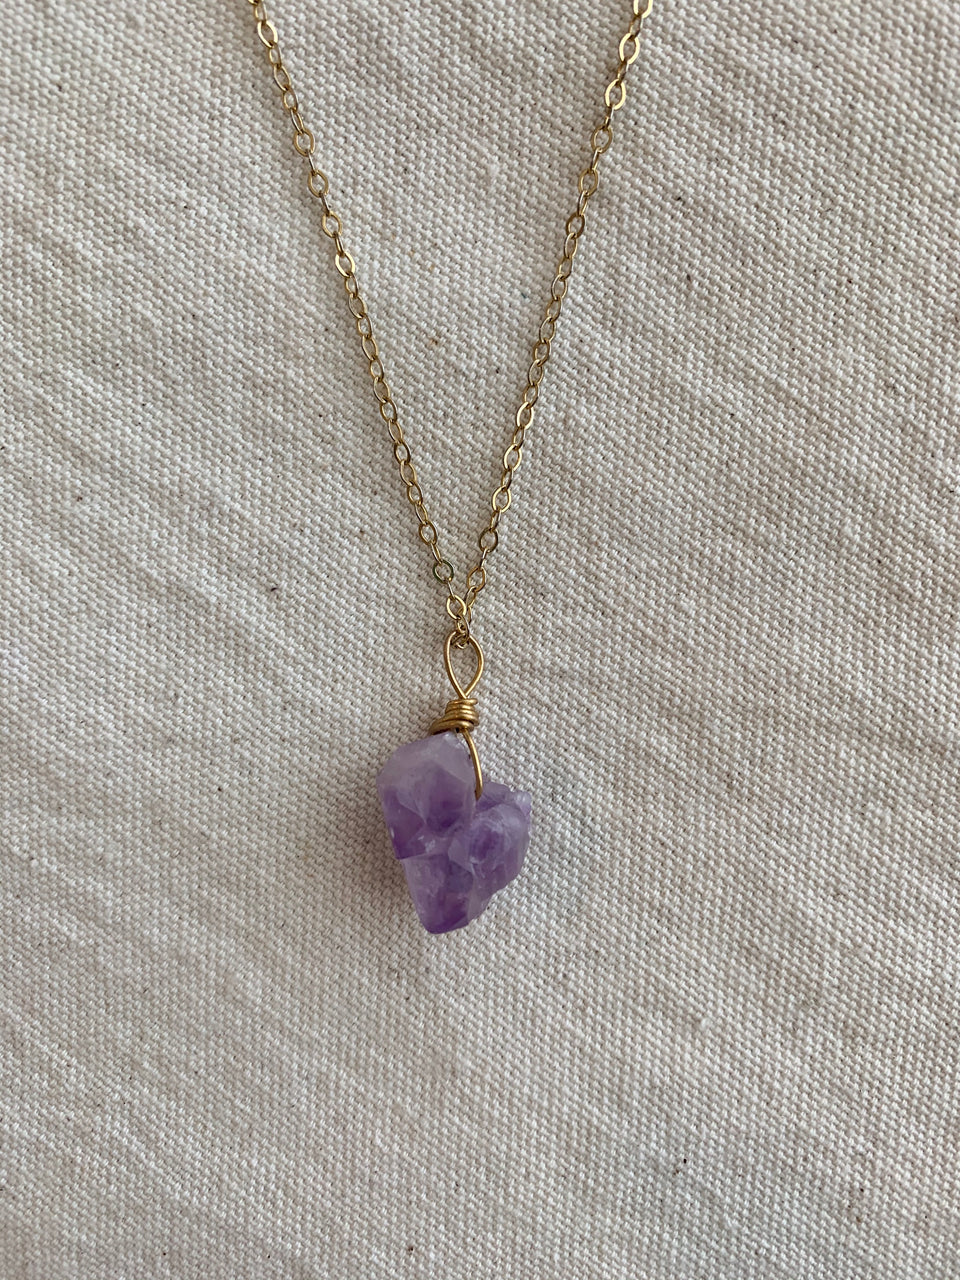 Amethyst charm necklace